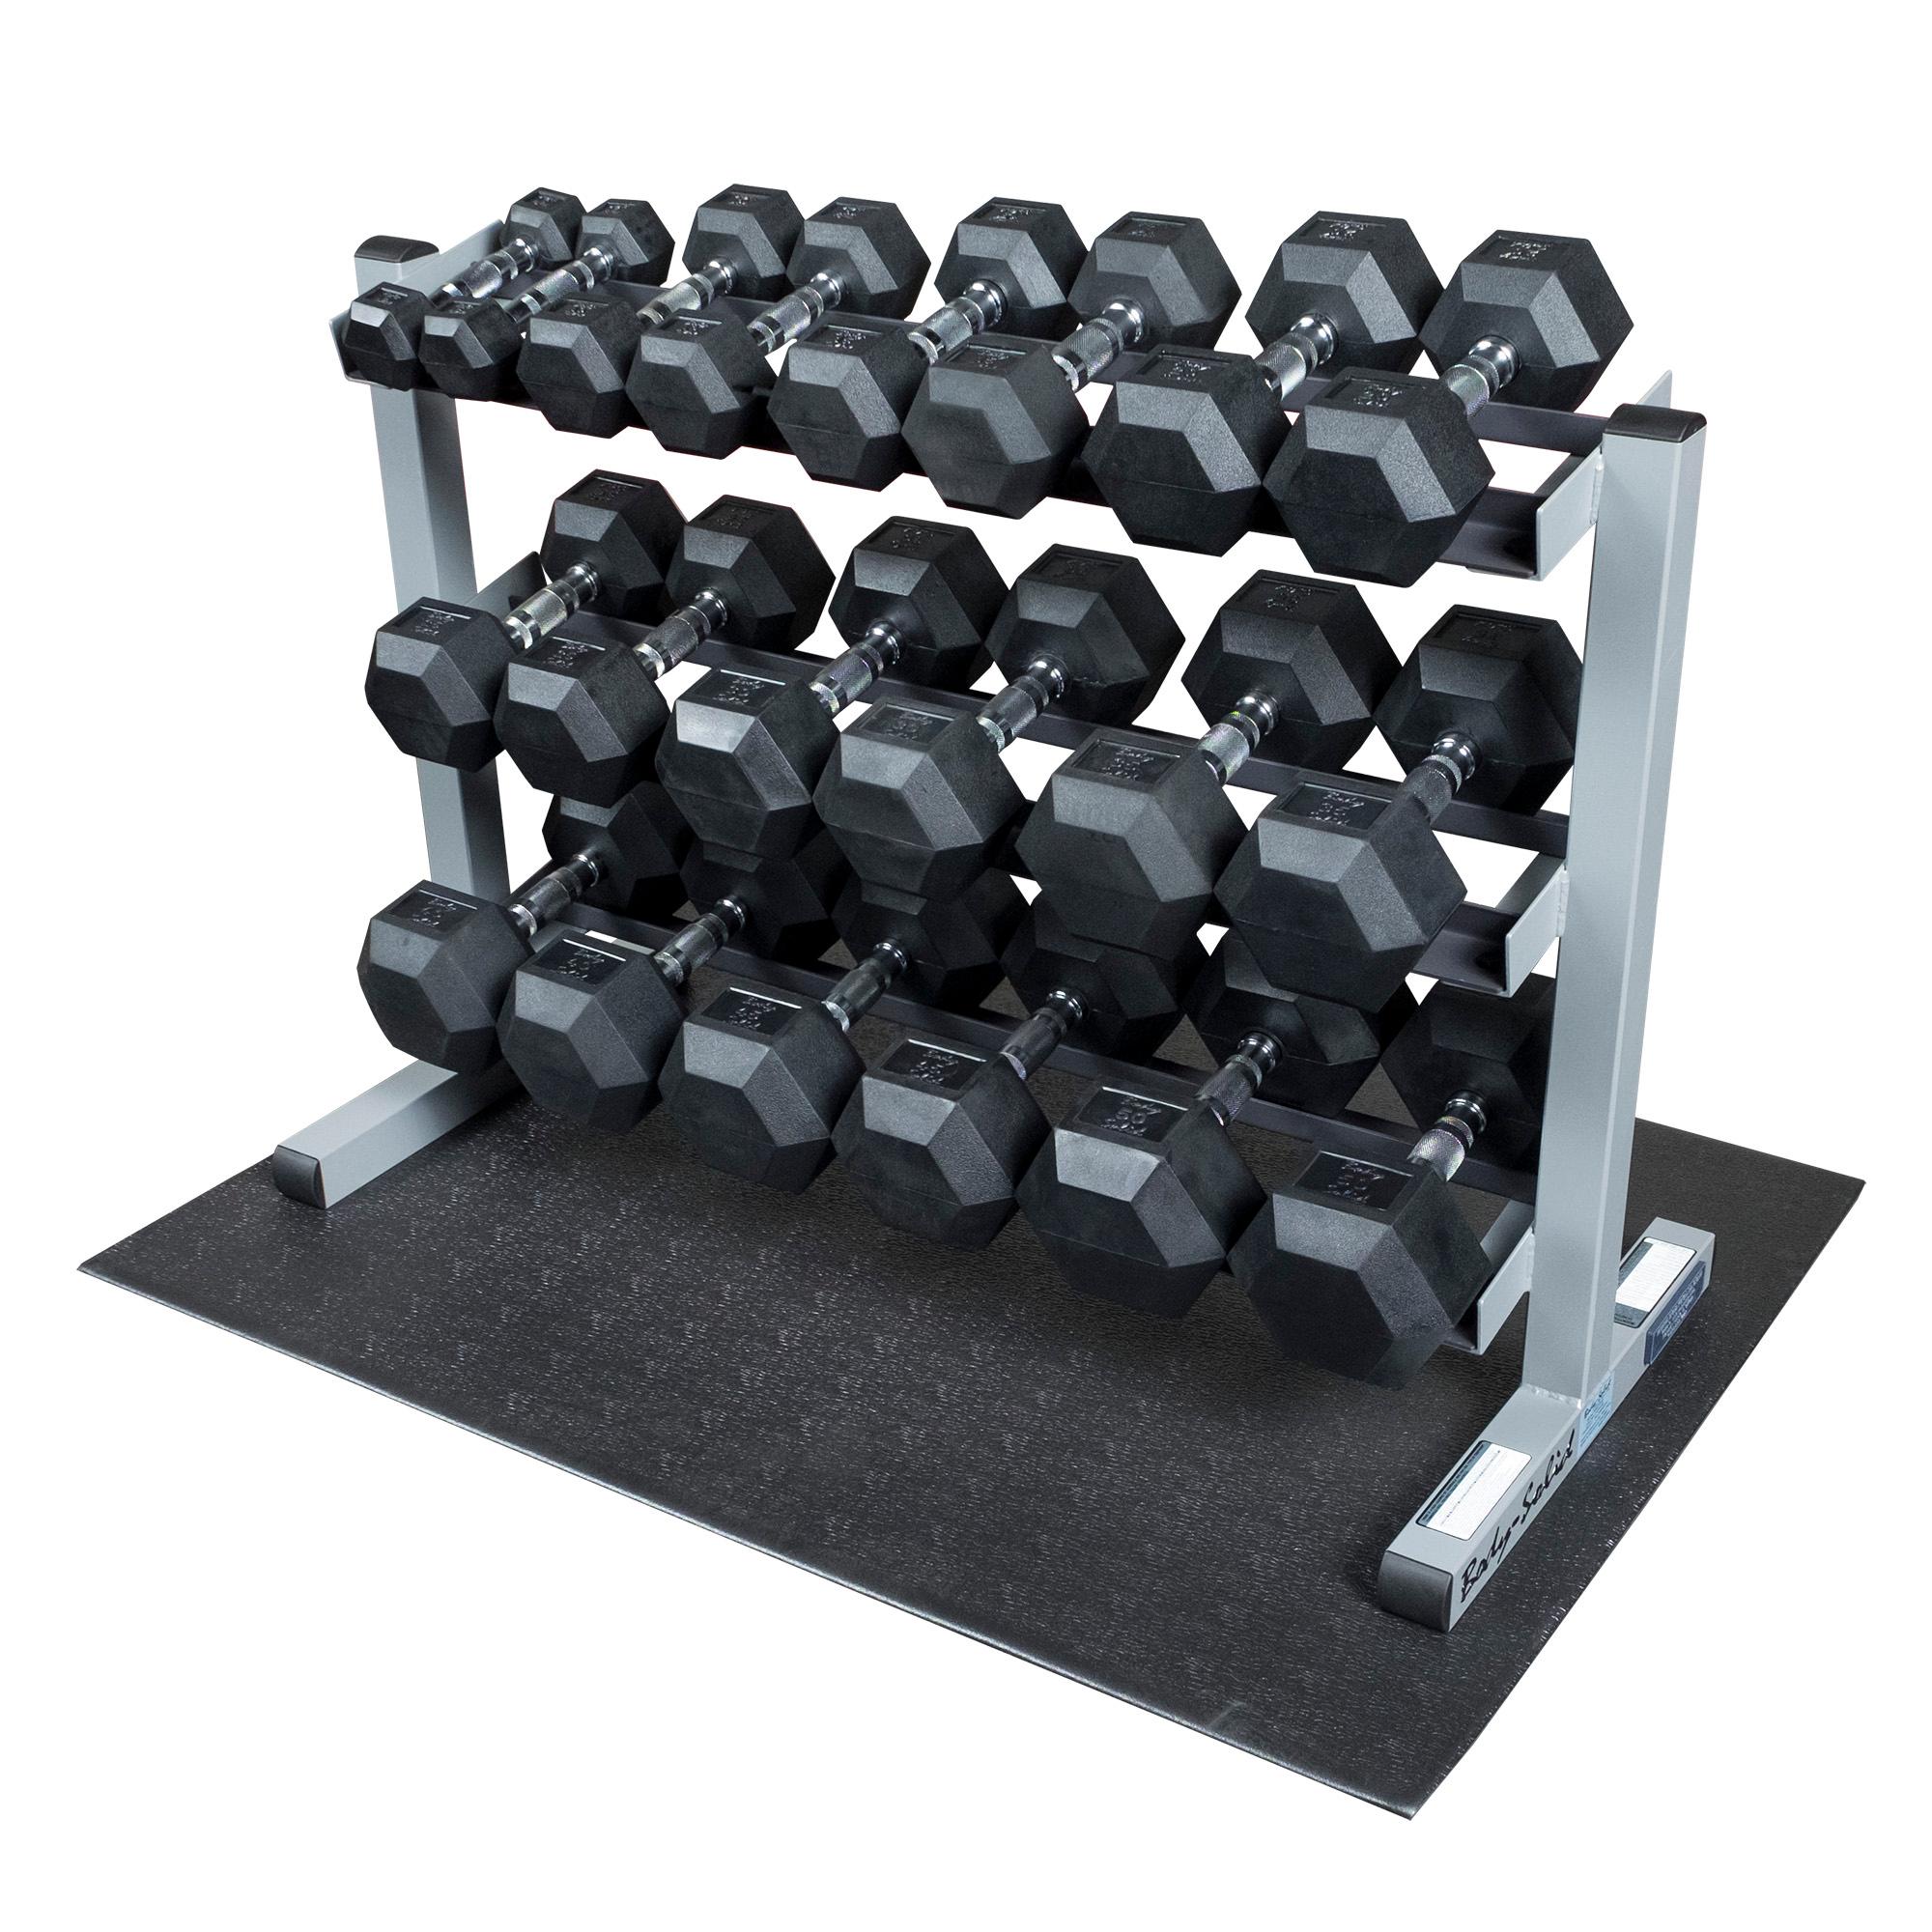 Amazon.com : Body Solid GDR363-RFWS Dumbbell Rack with Rubber ...